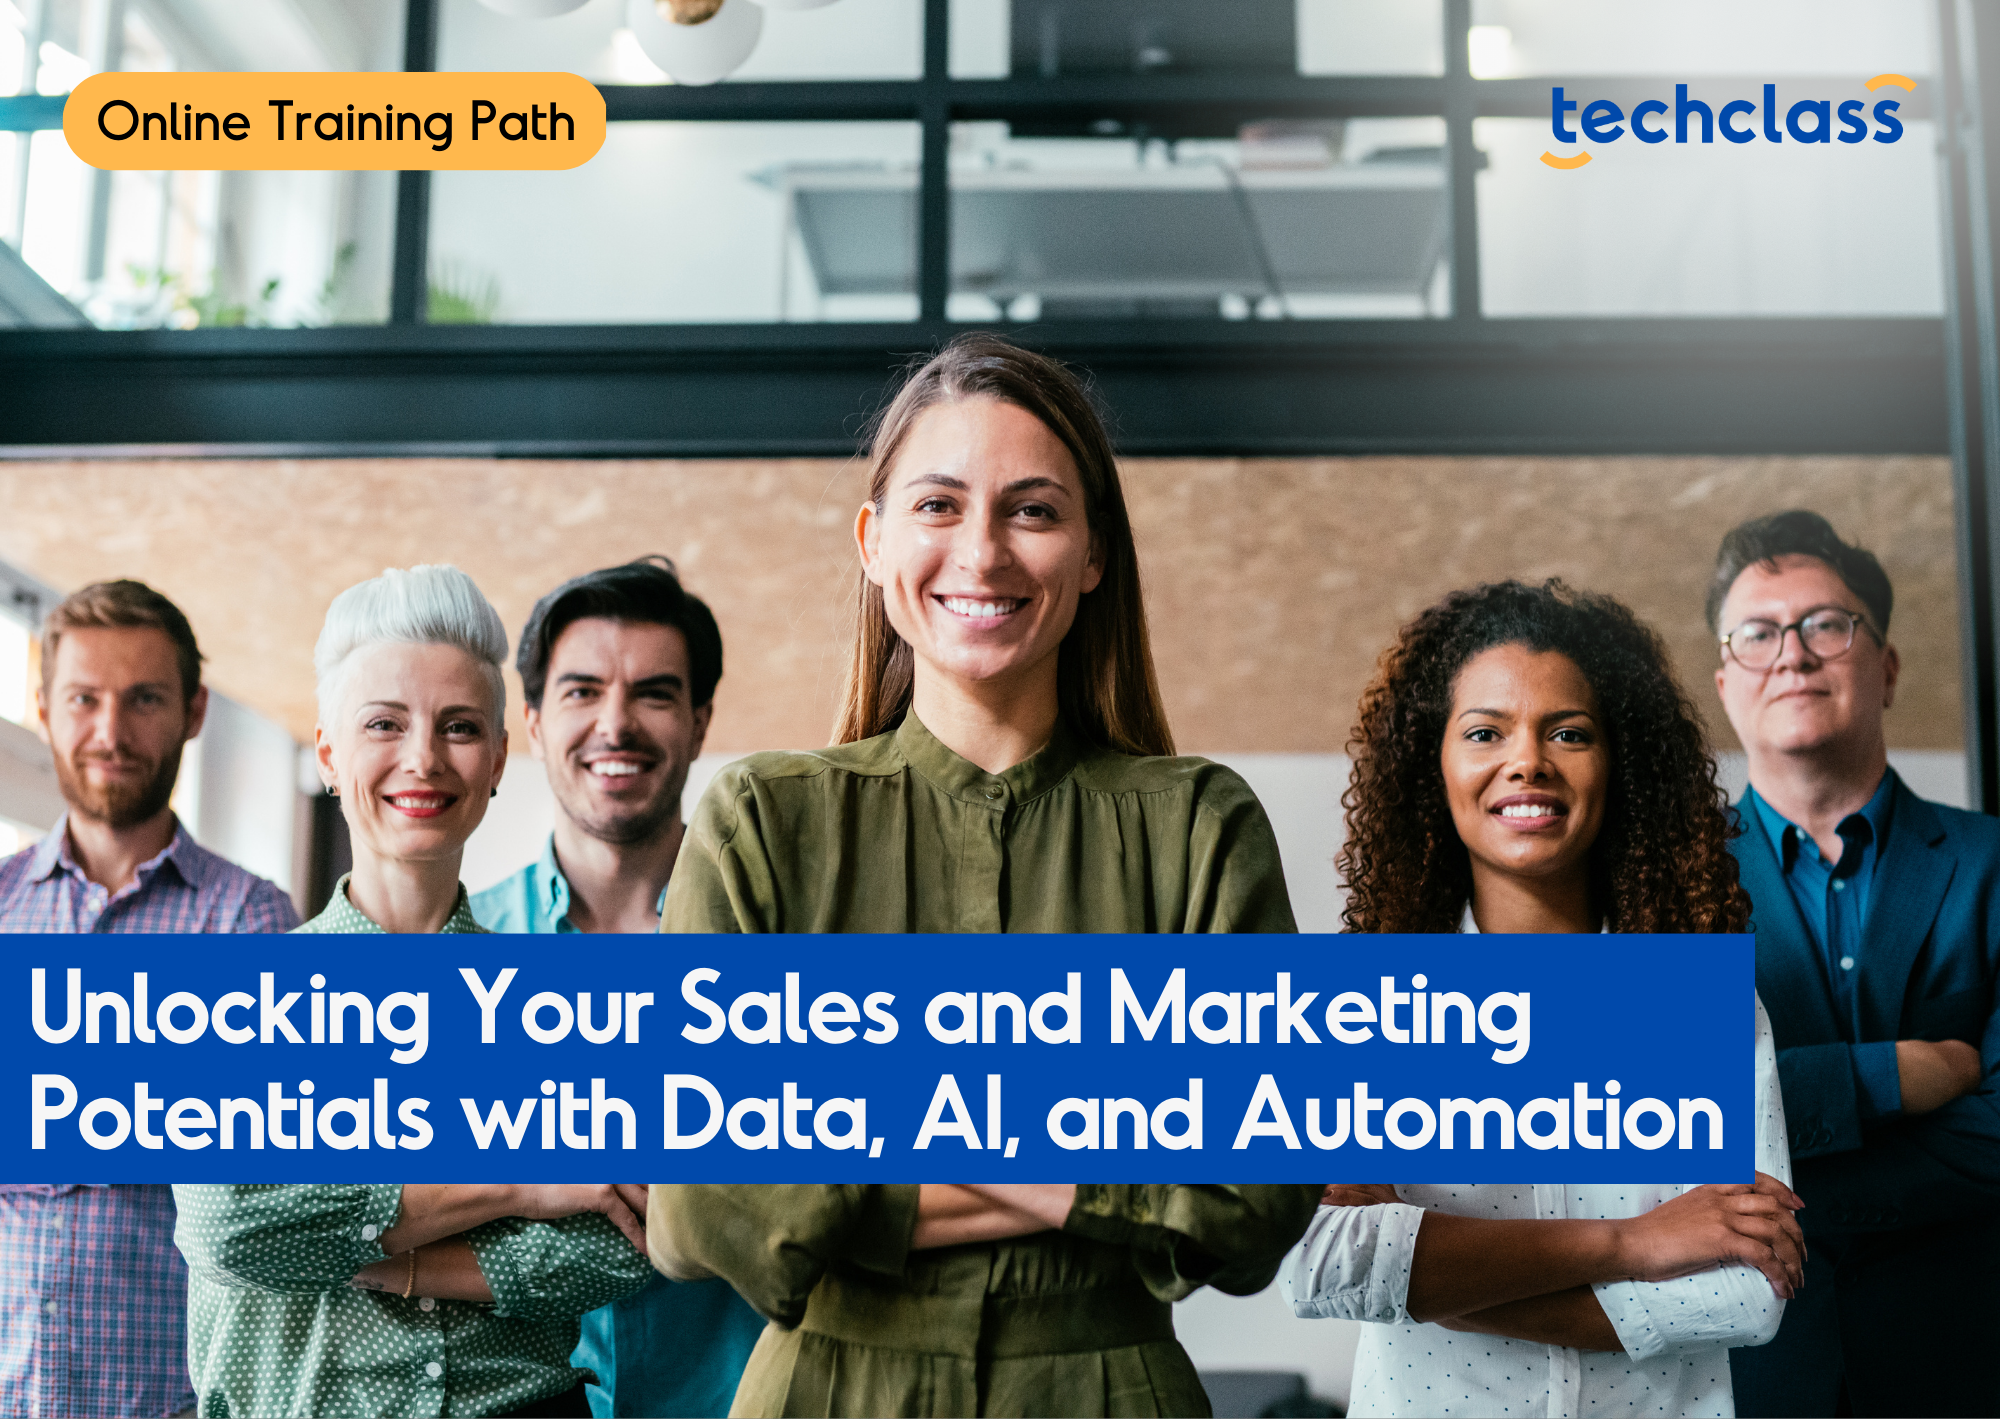 Unlocking Your Sales and Marketing Potentials with Data, AI, and Automation